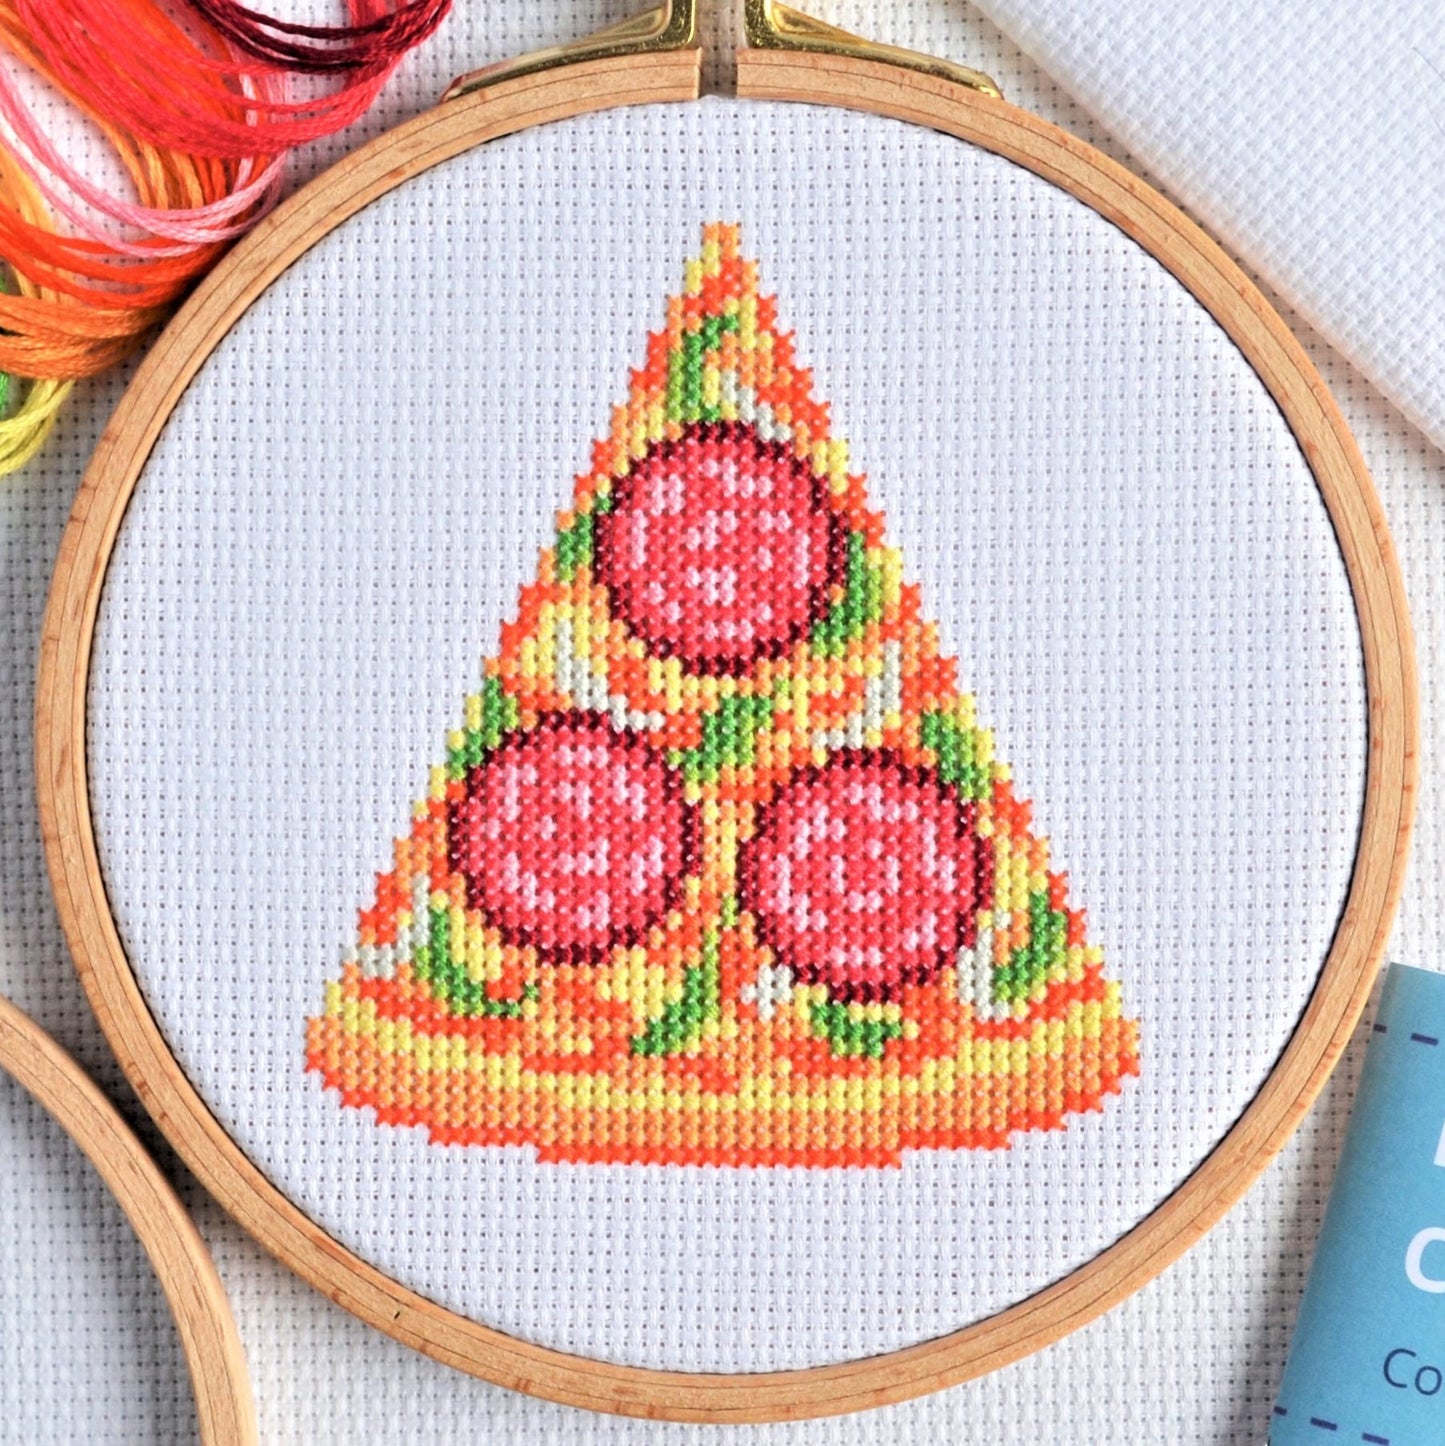 Cross Stitch Kit for Beginners ~ Pizza